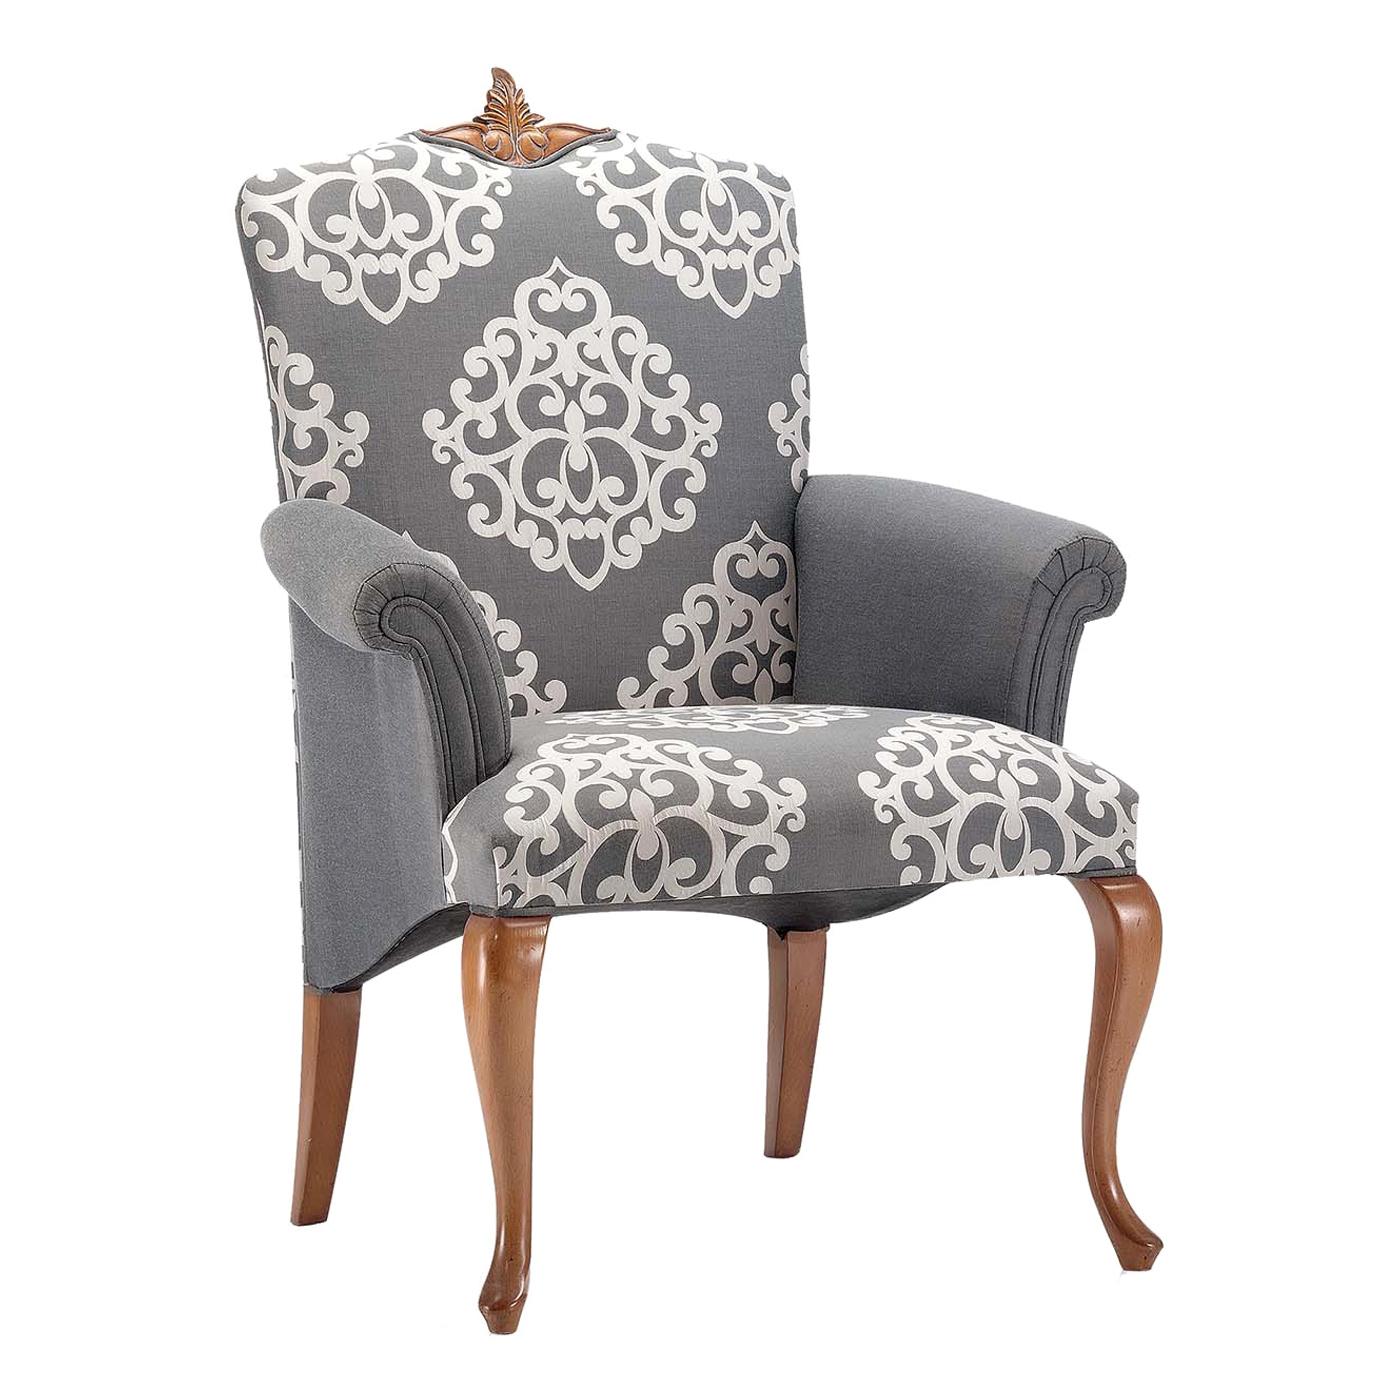 Gray Damask Chair with Armrests